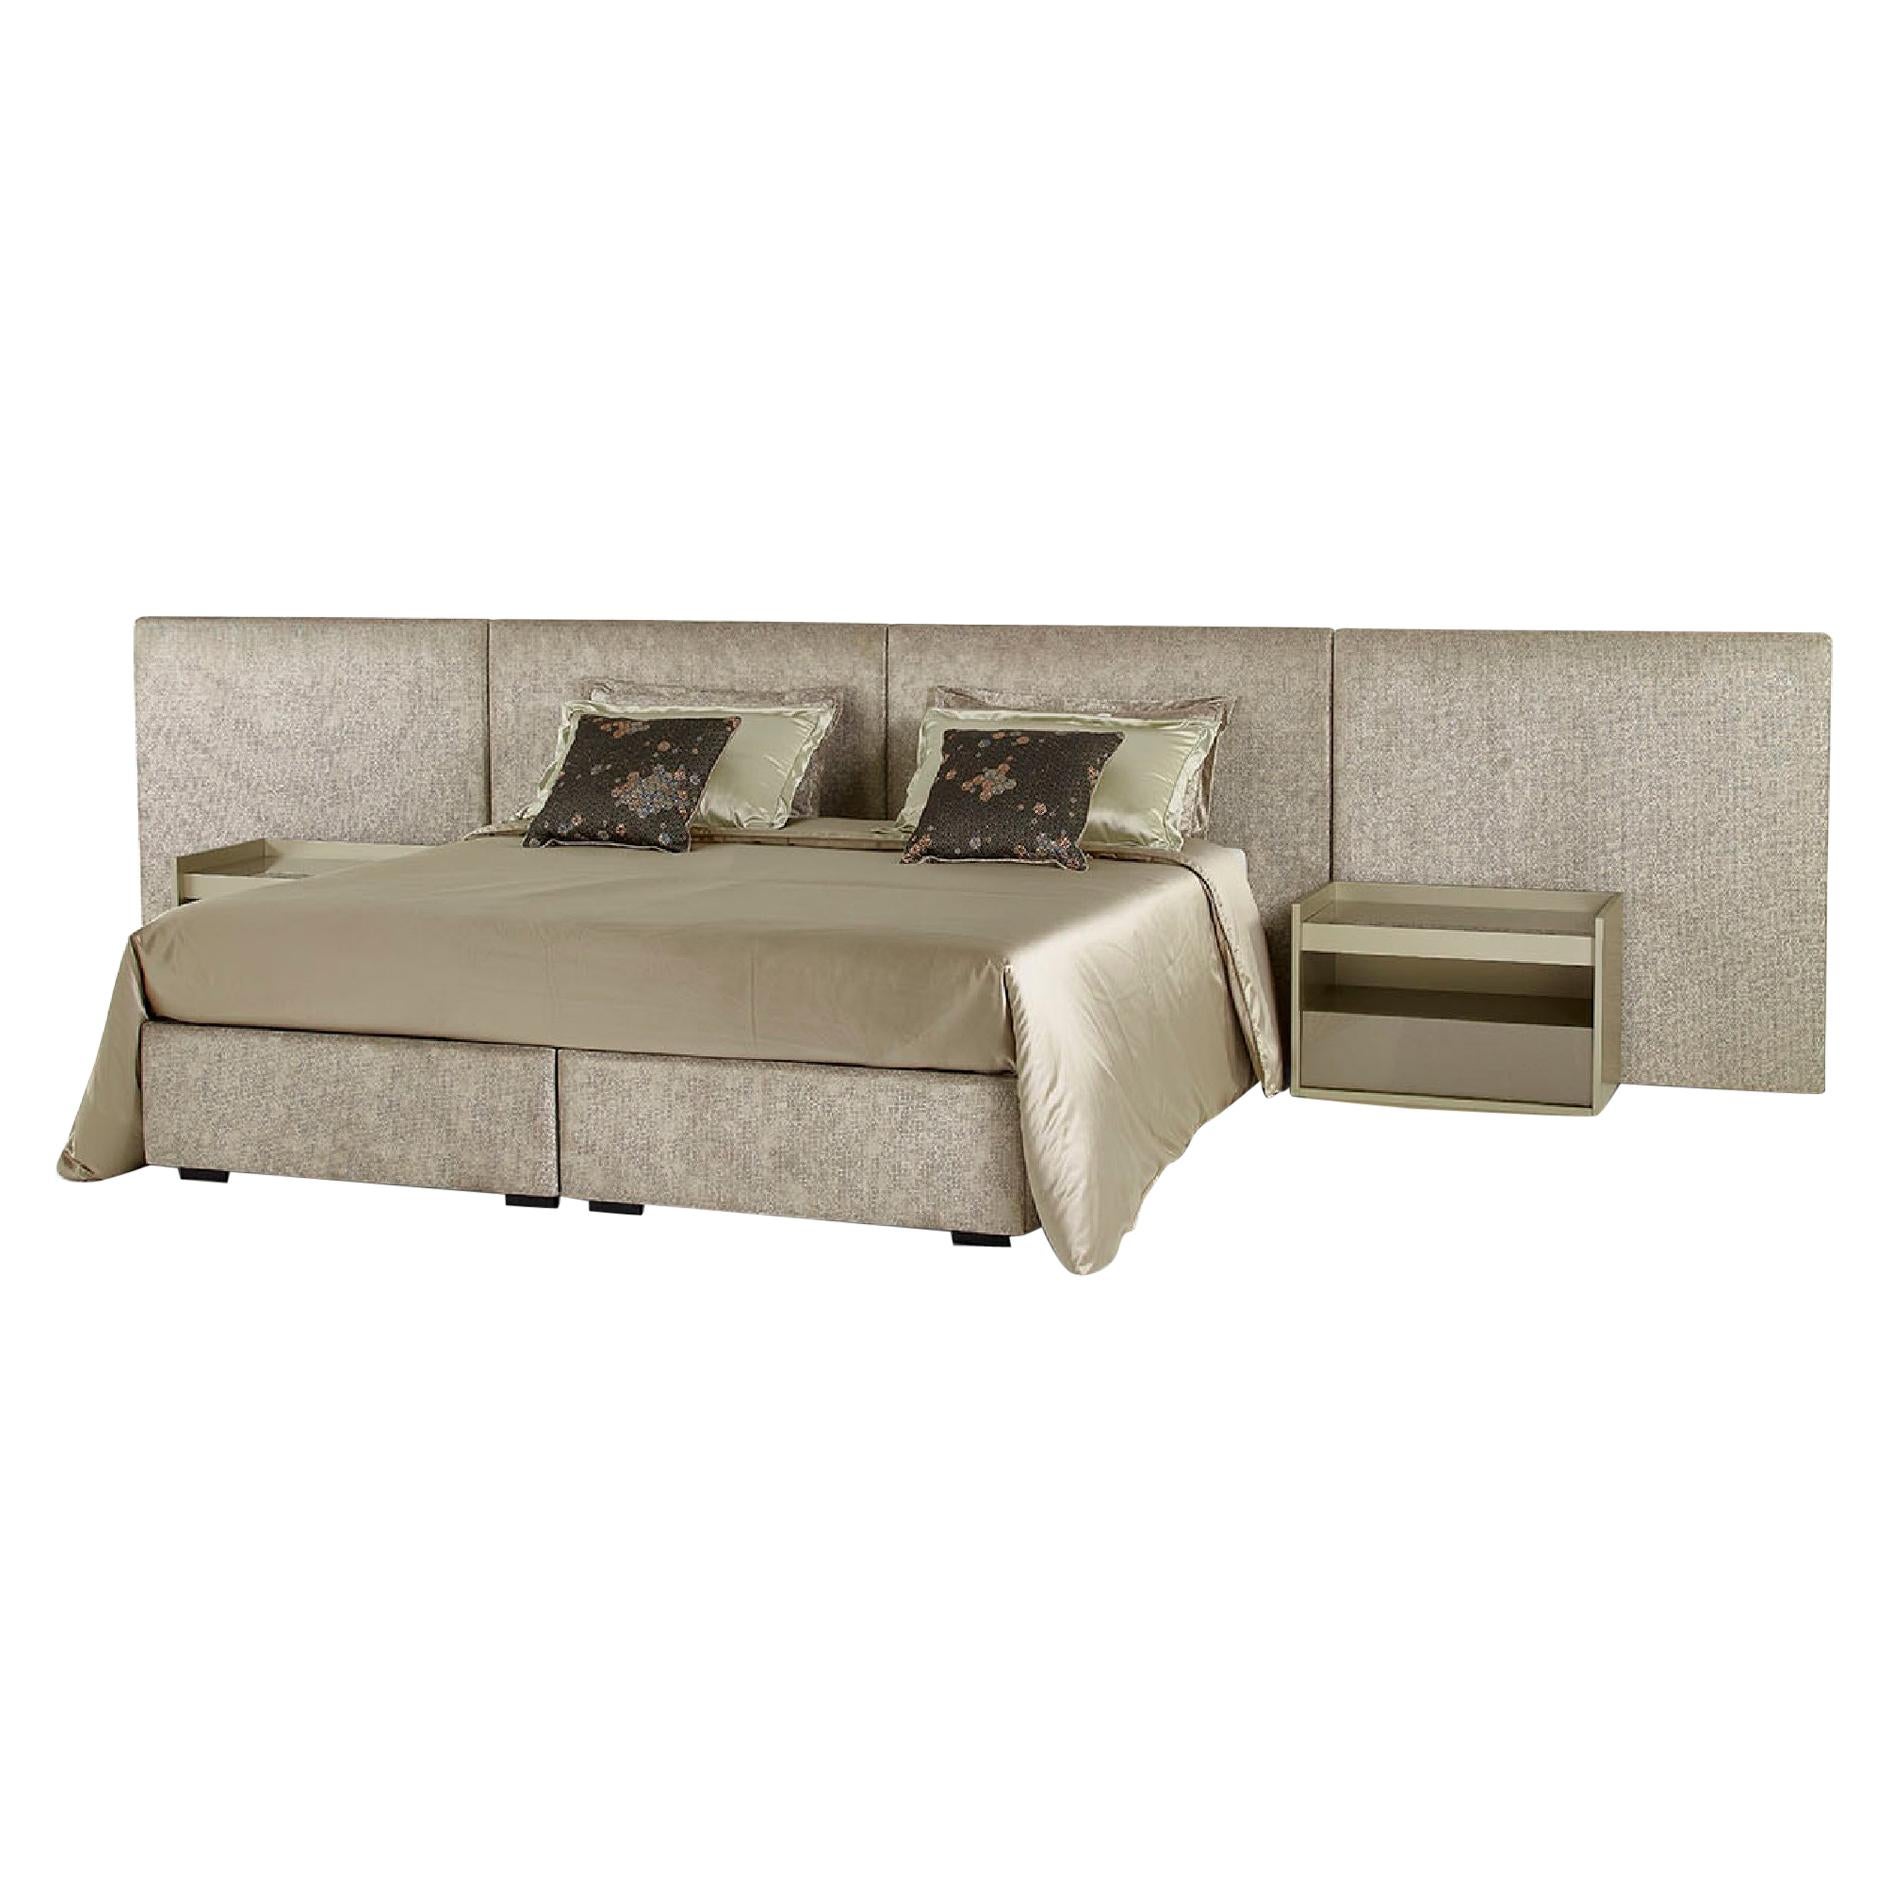 Fantastic Bed Headboard and Bed Frame in  Wood Available in Fabric or Leather For Sale